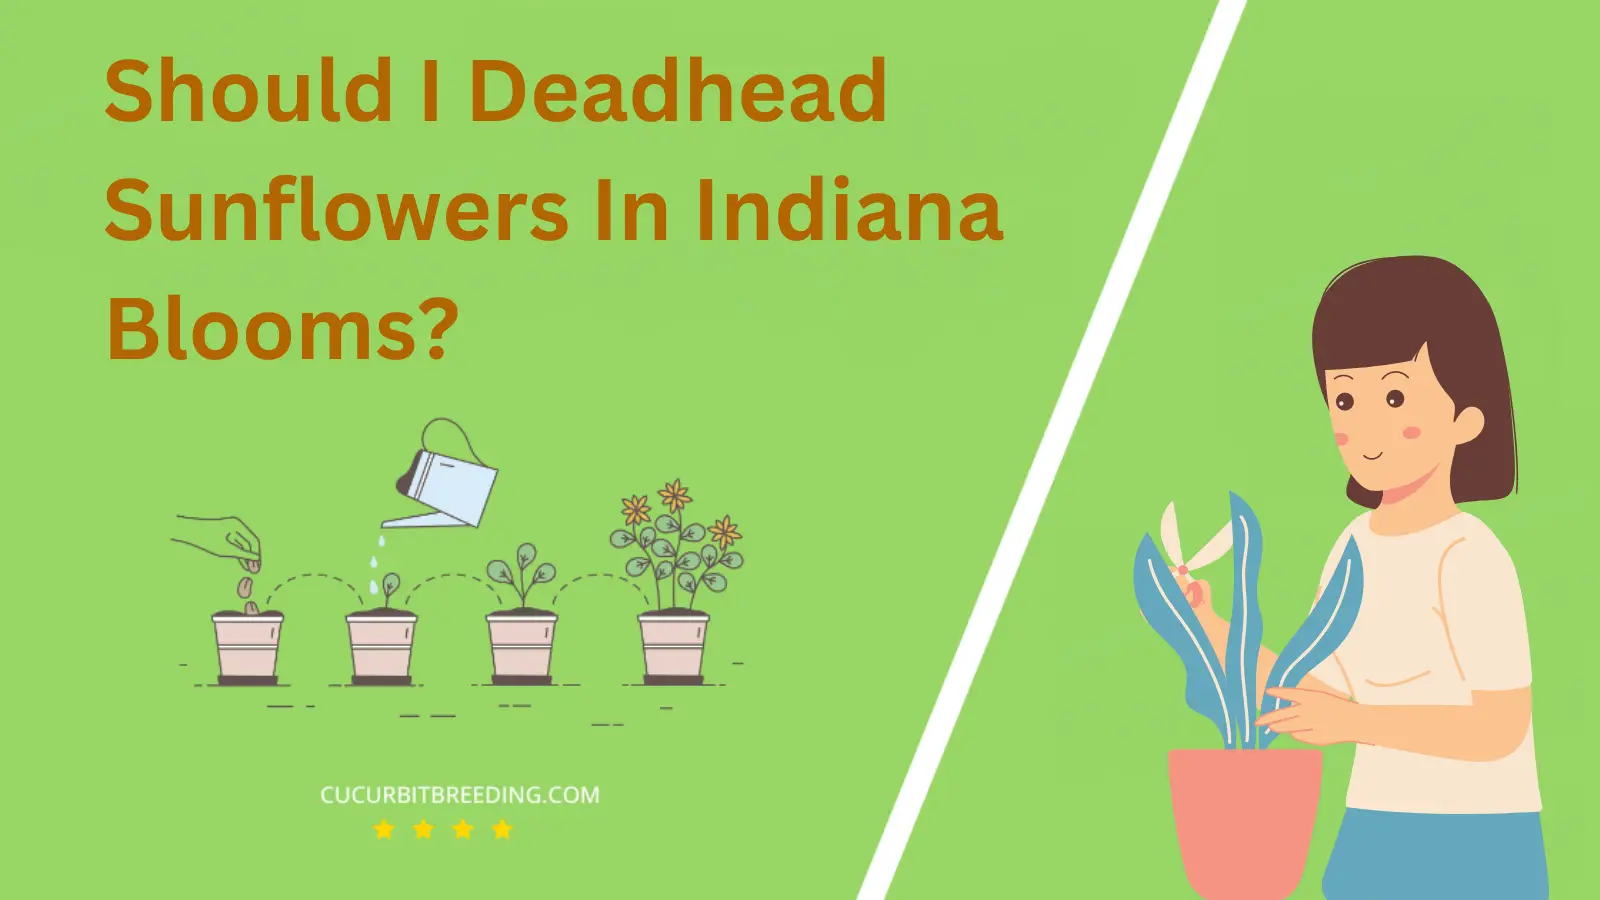 Should I Deadhead Sunflowers In Indiana Blooms?